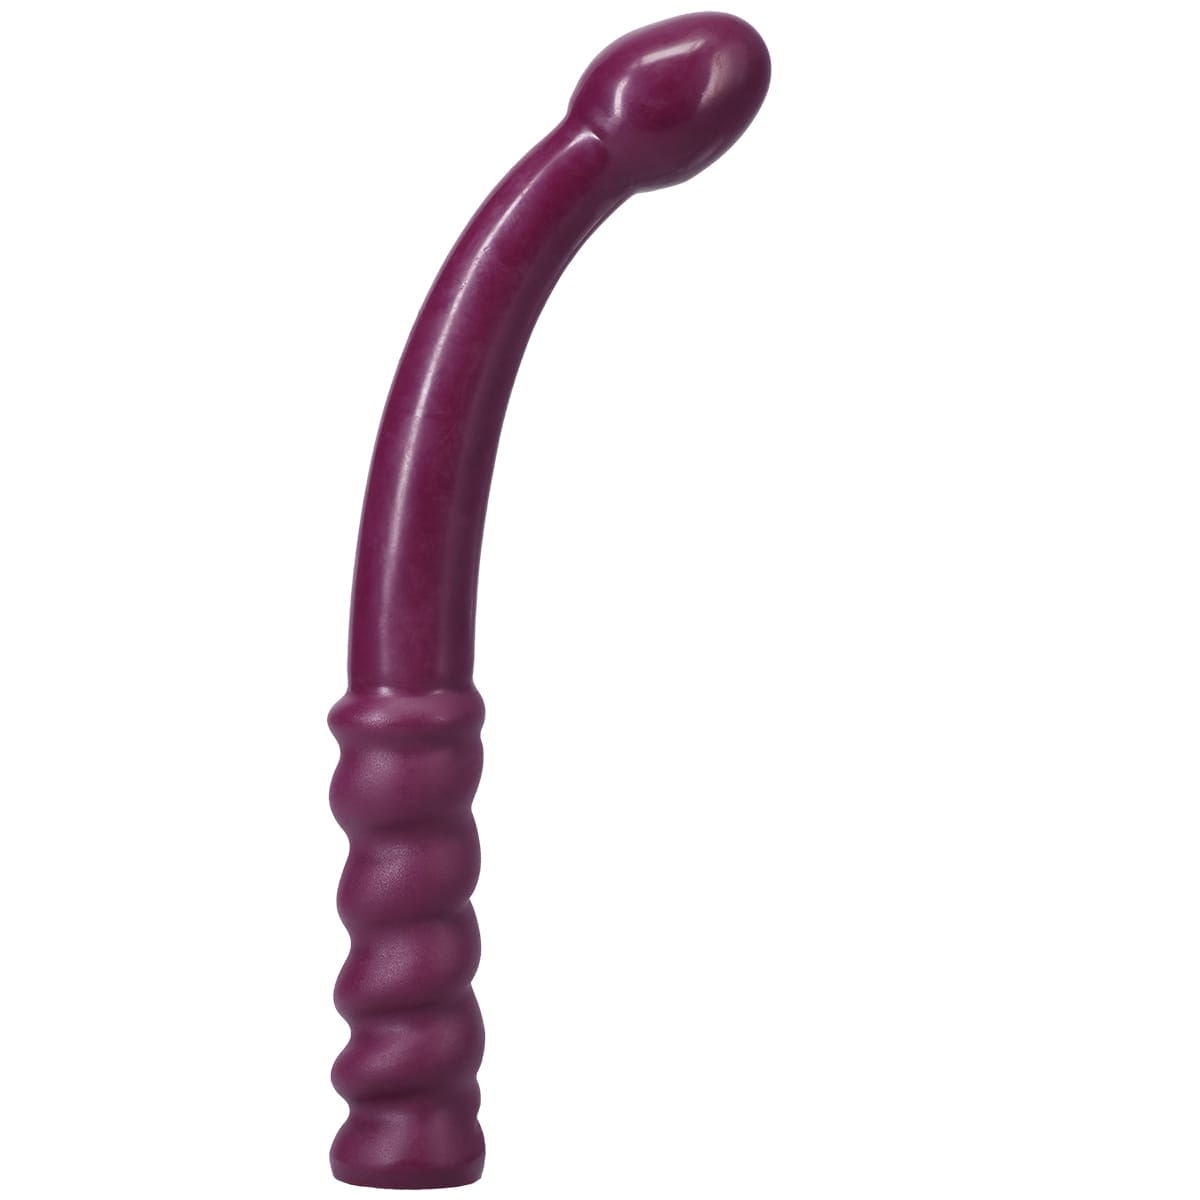 Buy Tantus G Force Handle Dildo  Burgundy  long and  thick dildo made by Tantus.